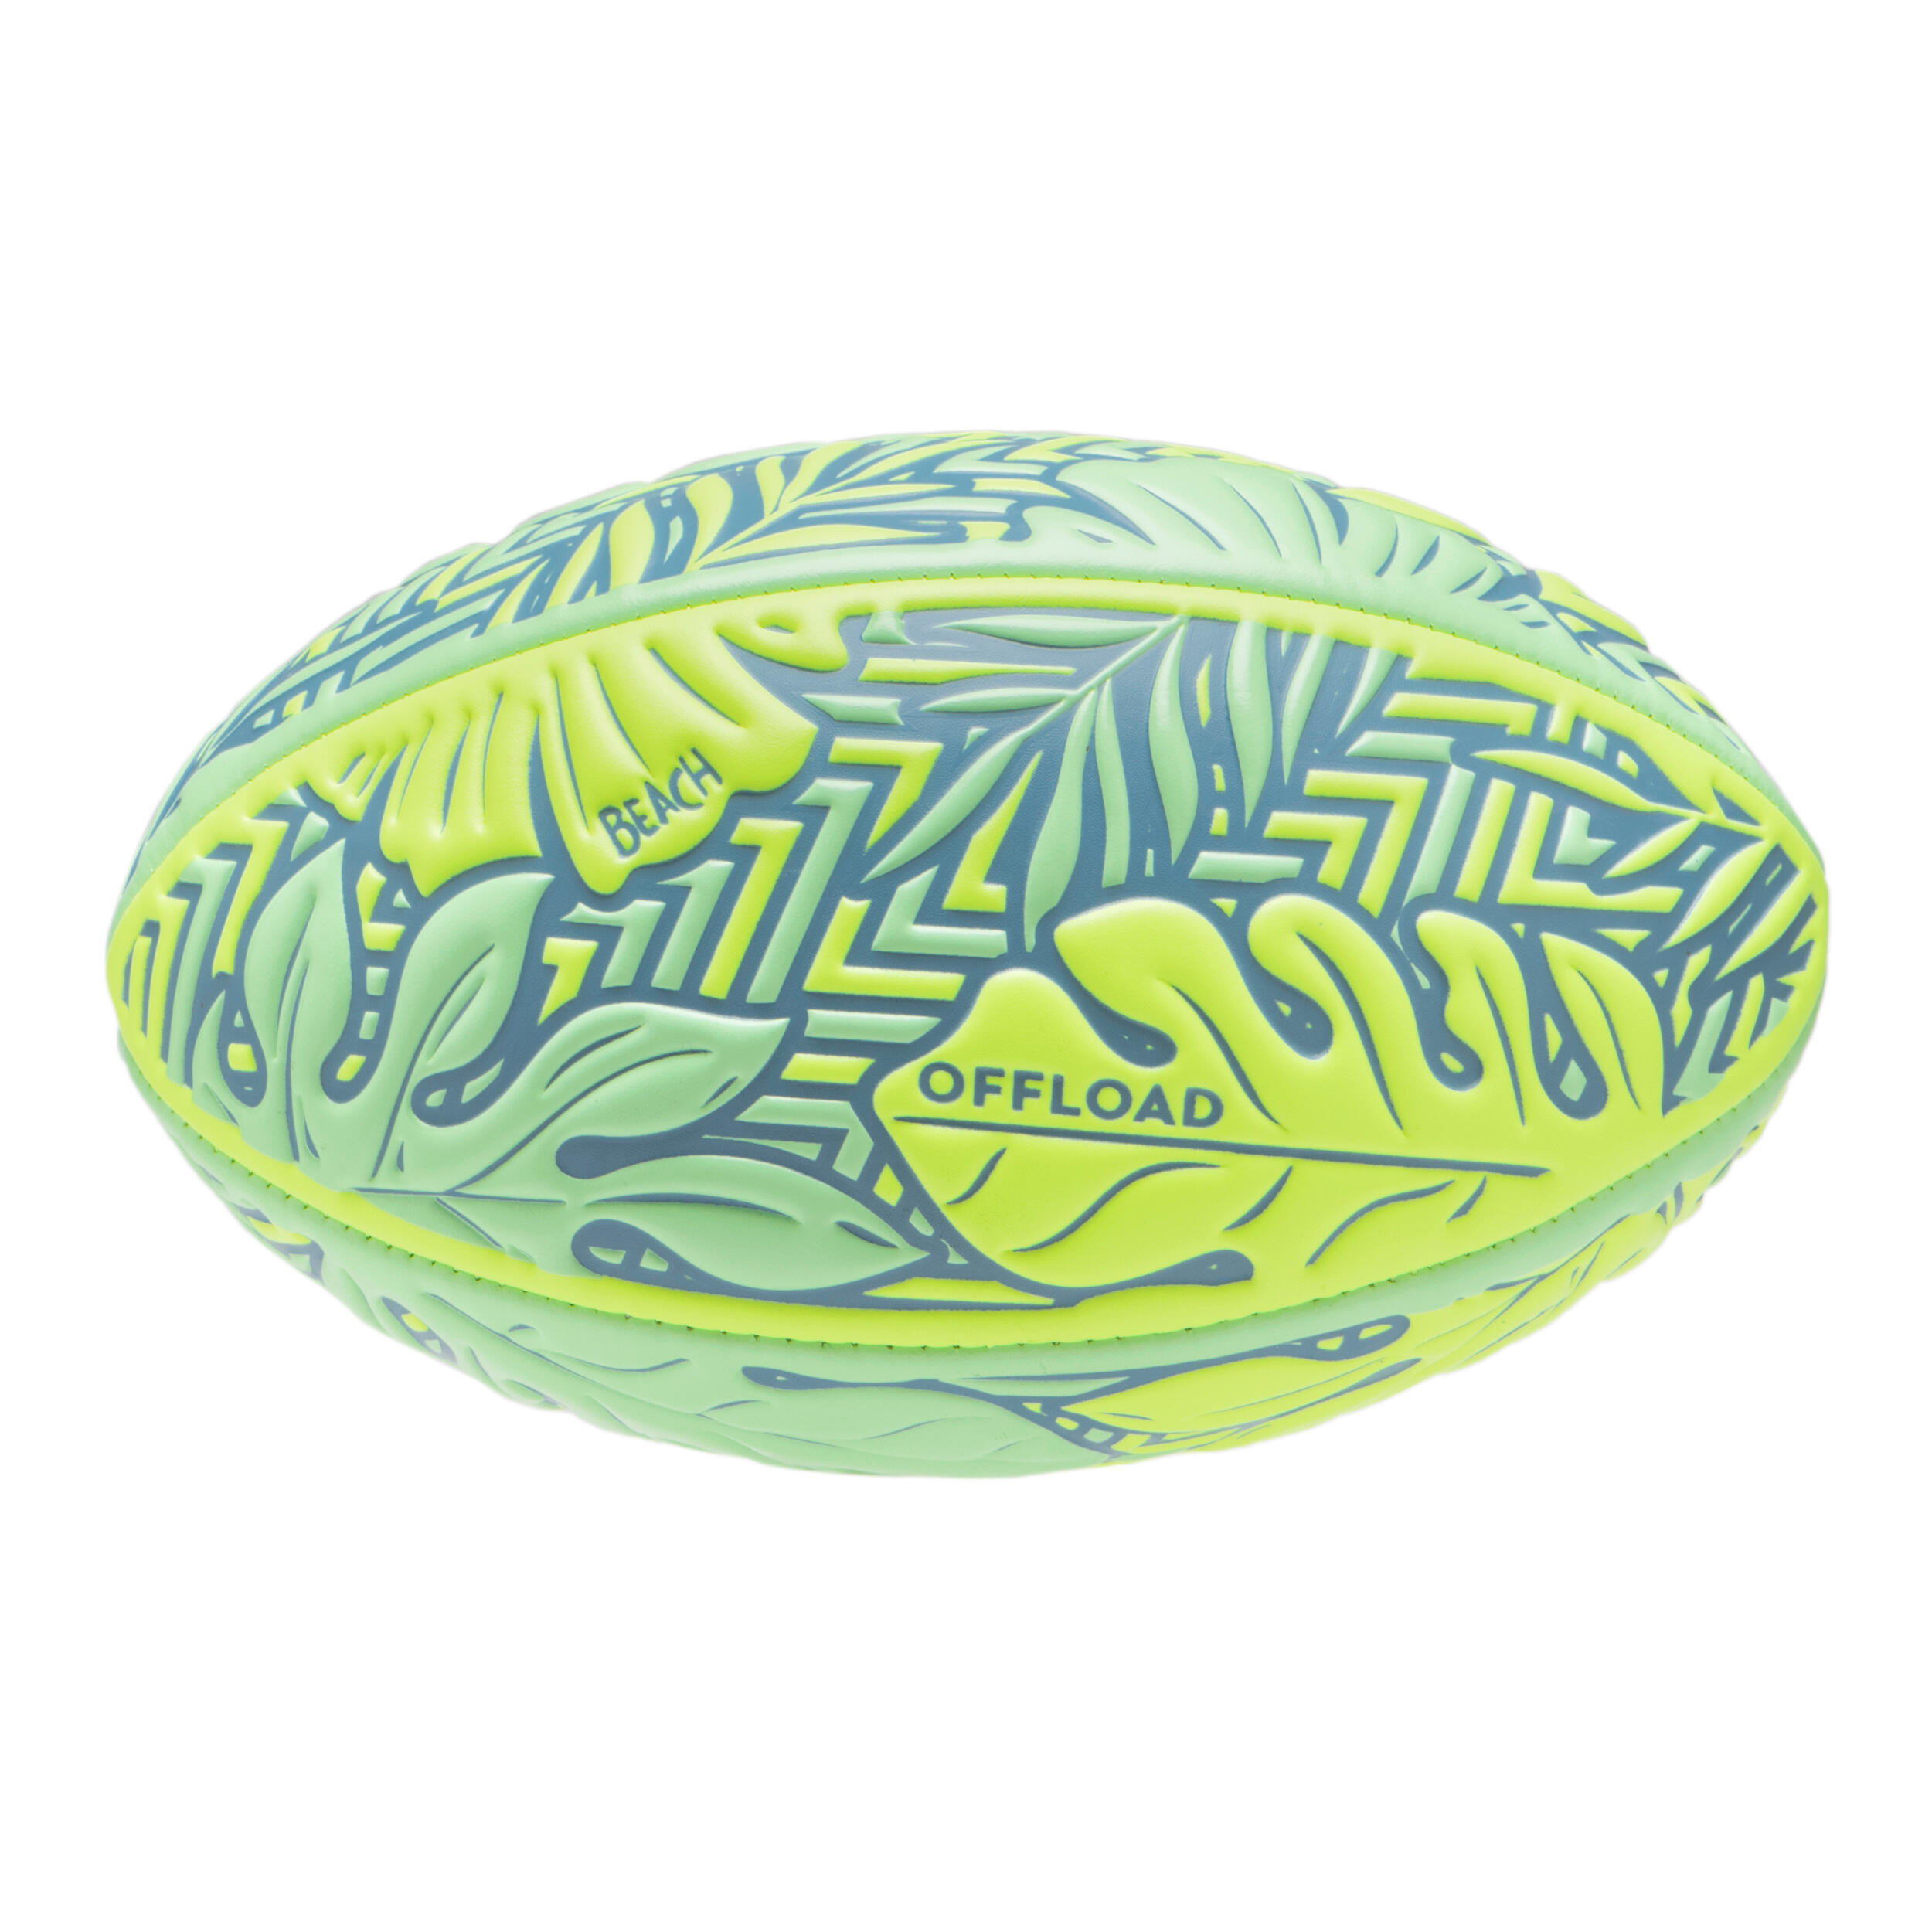 OFFLOAD Beach Rugby Ball R100 Midi Tropical Size 1 - Yellow/Green